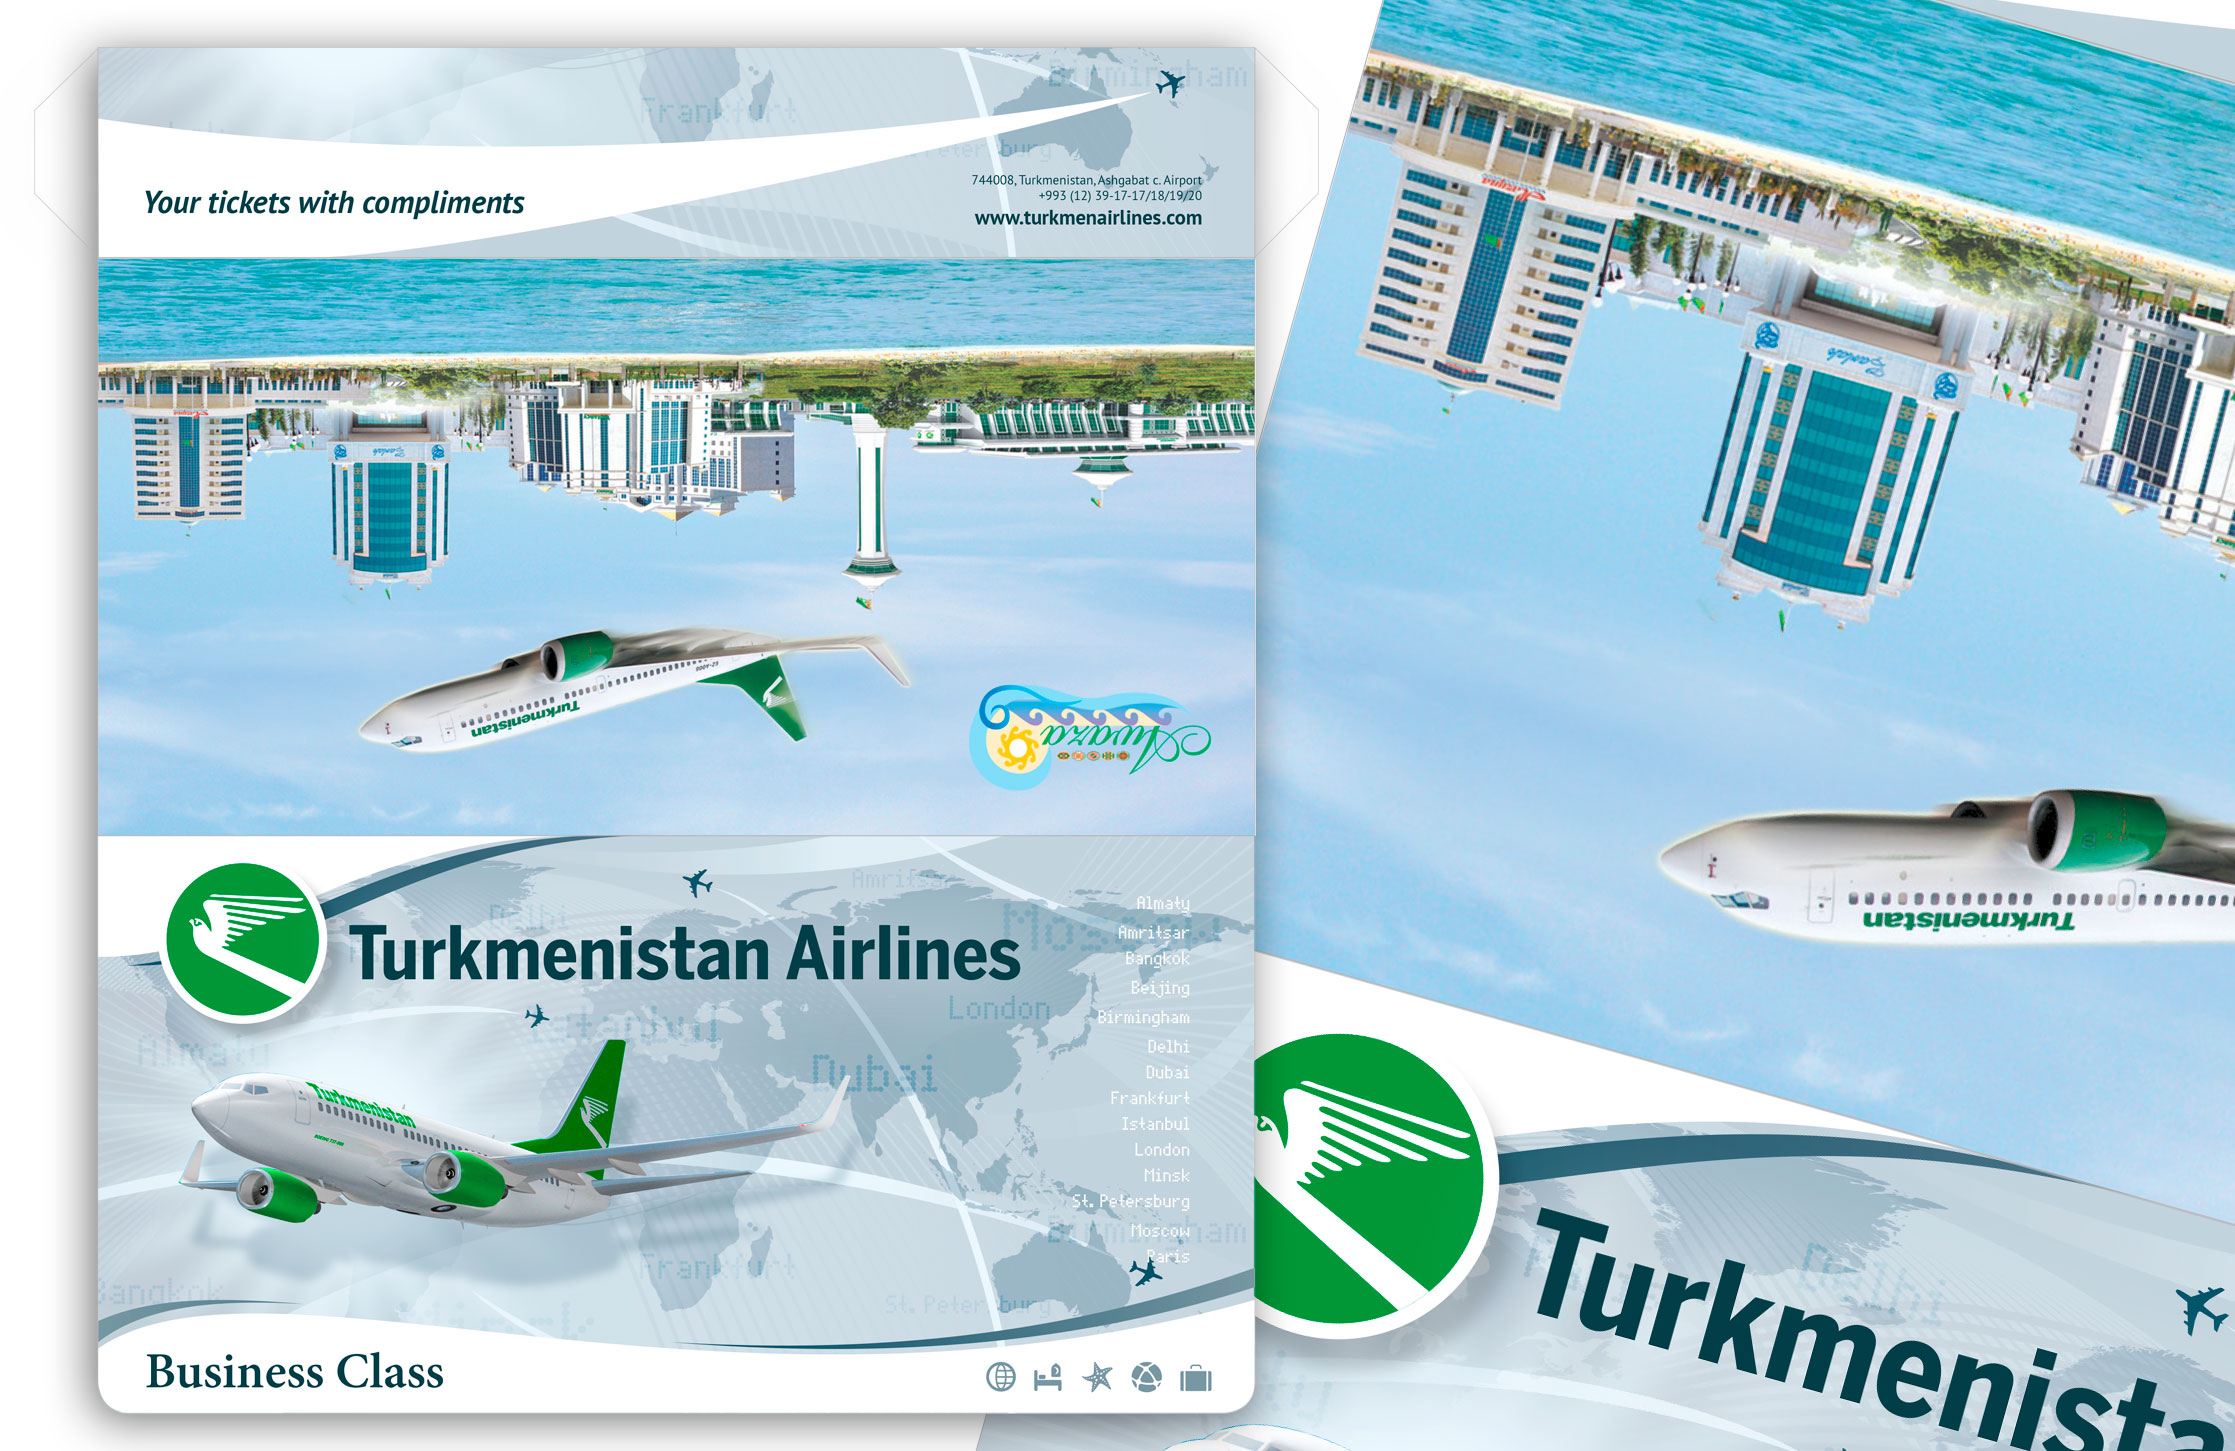 Design of a ticket Wallet for Turkmenistan Airlines